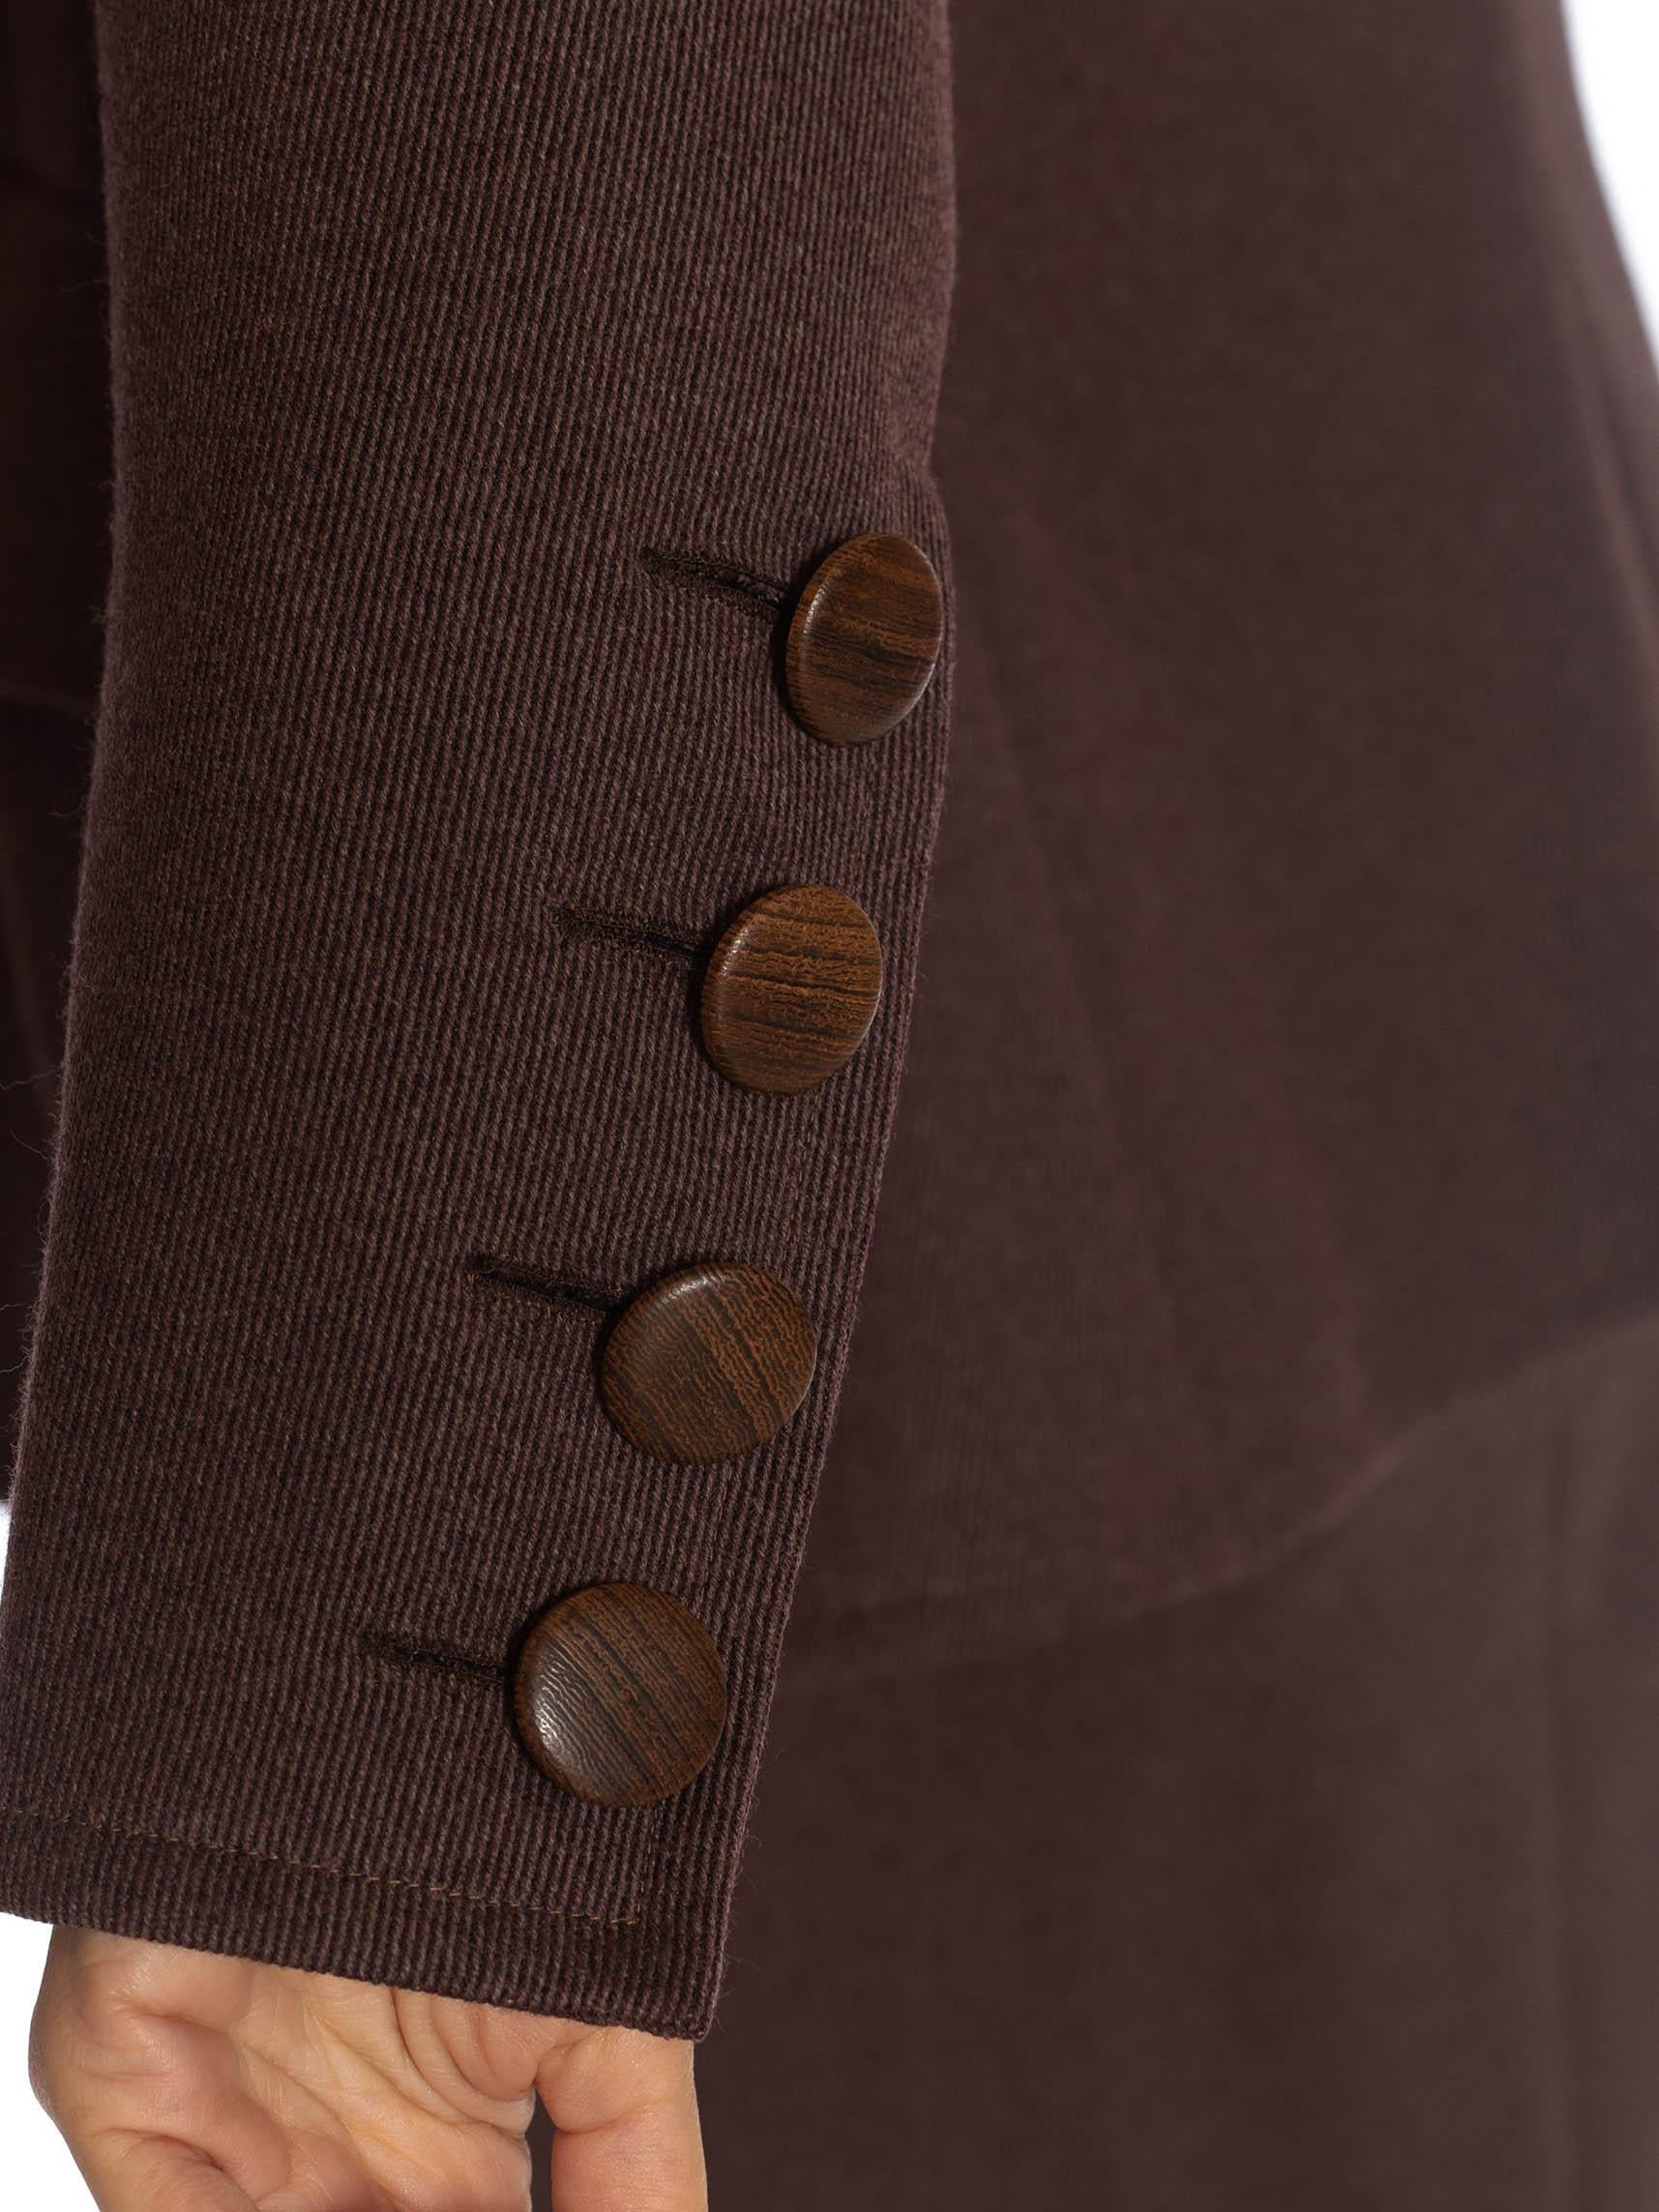 1980S YVES SAINT LAURENT Brown Haute Couture Wool Skirt Suit For Sale 3